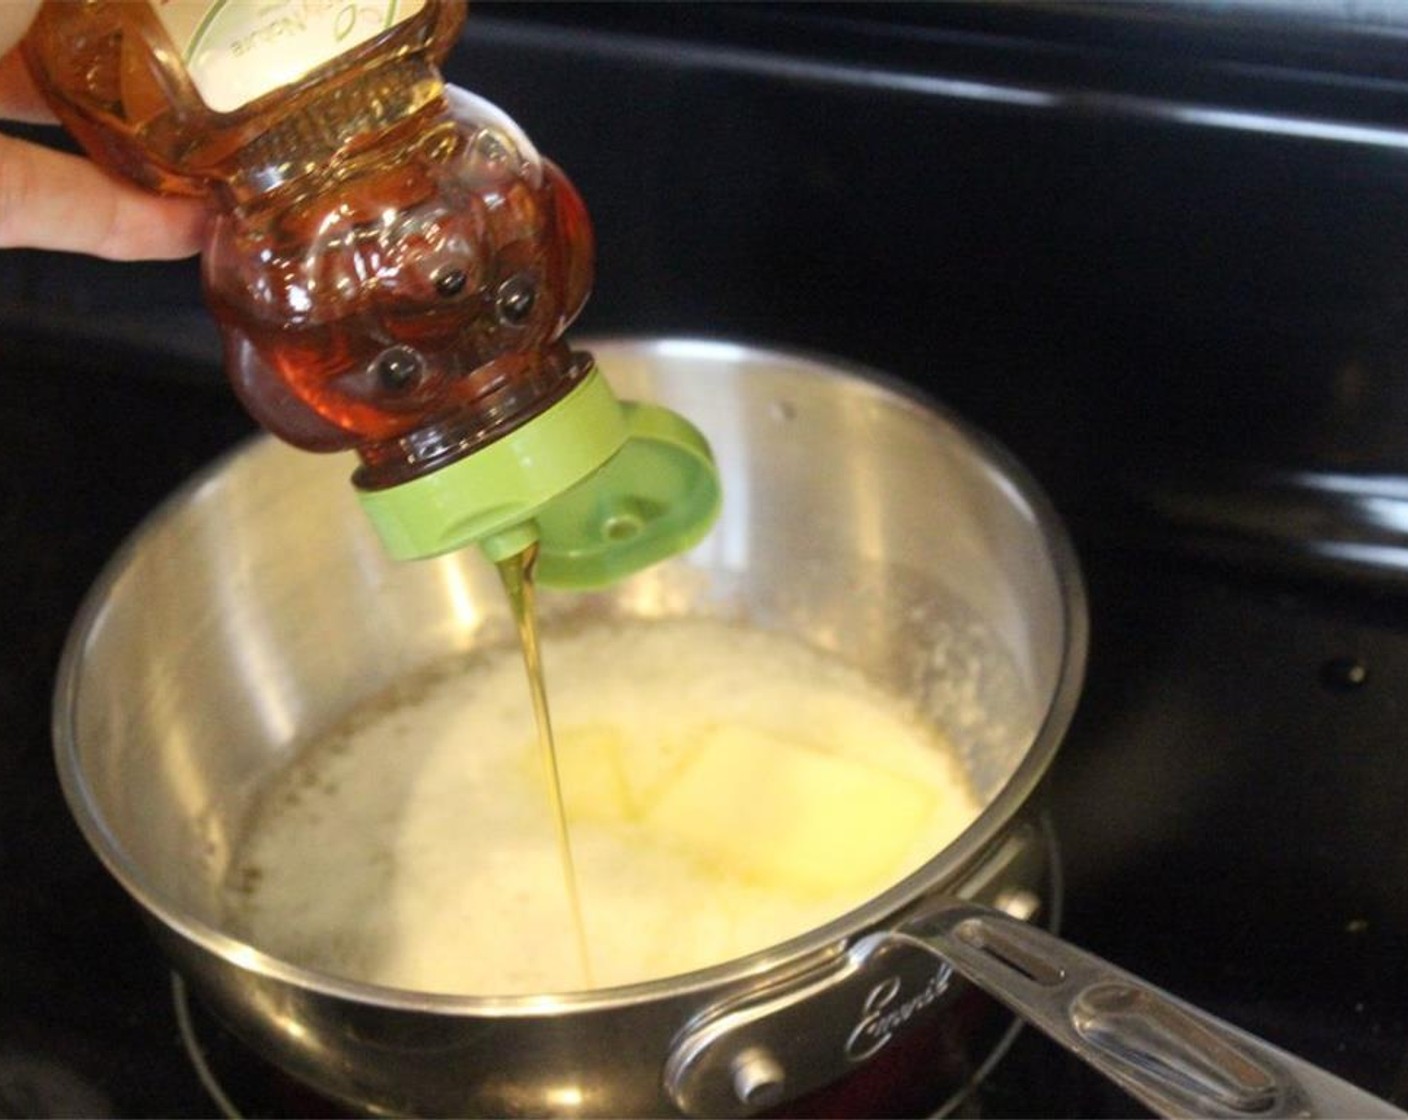 step 6 Once the butter has melted, add the Honey (1/4 cup) and Vanilla Extract (1 tsp).